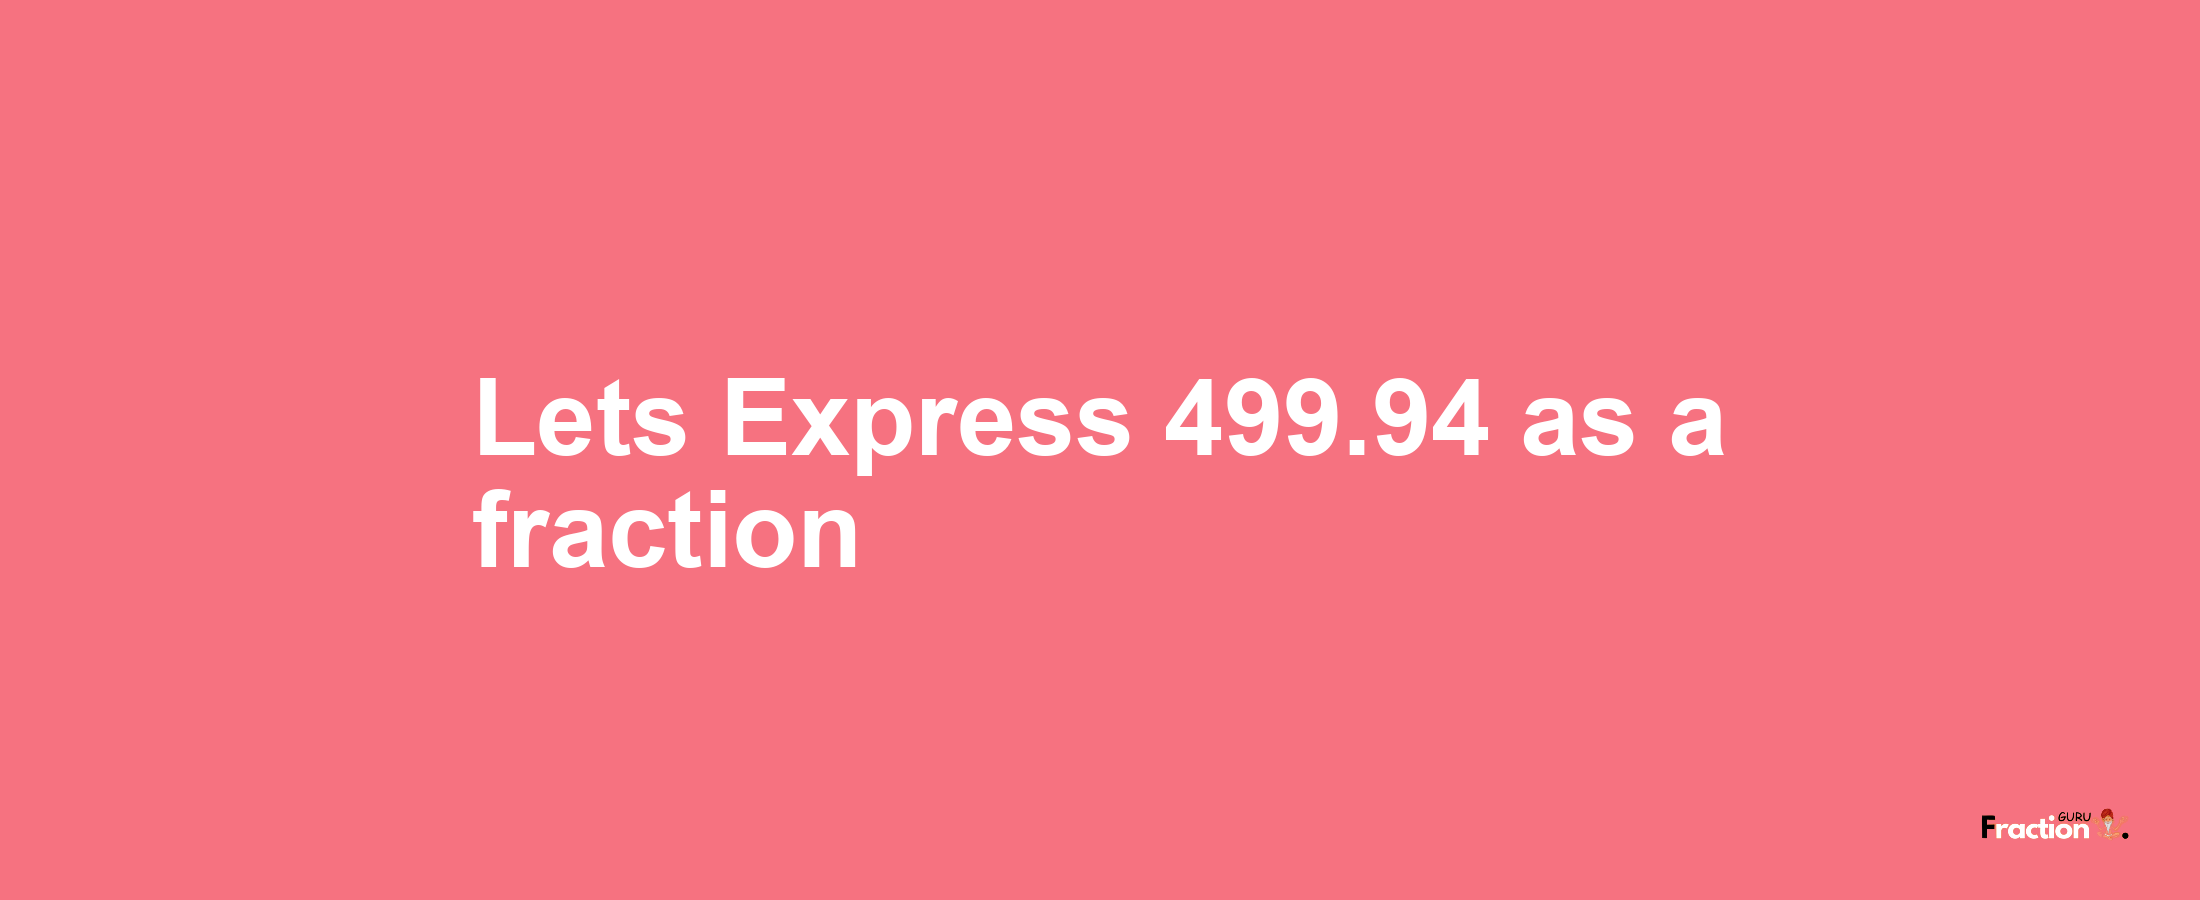 Lets Express 499.94 as afraction